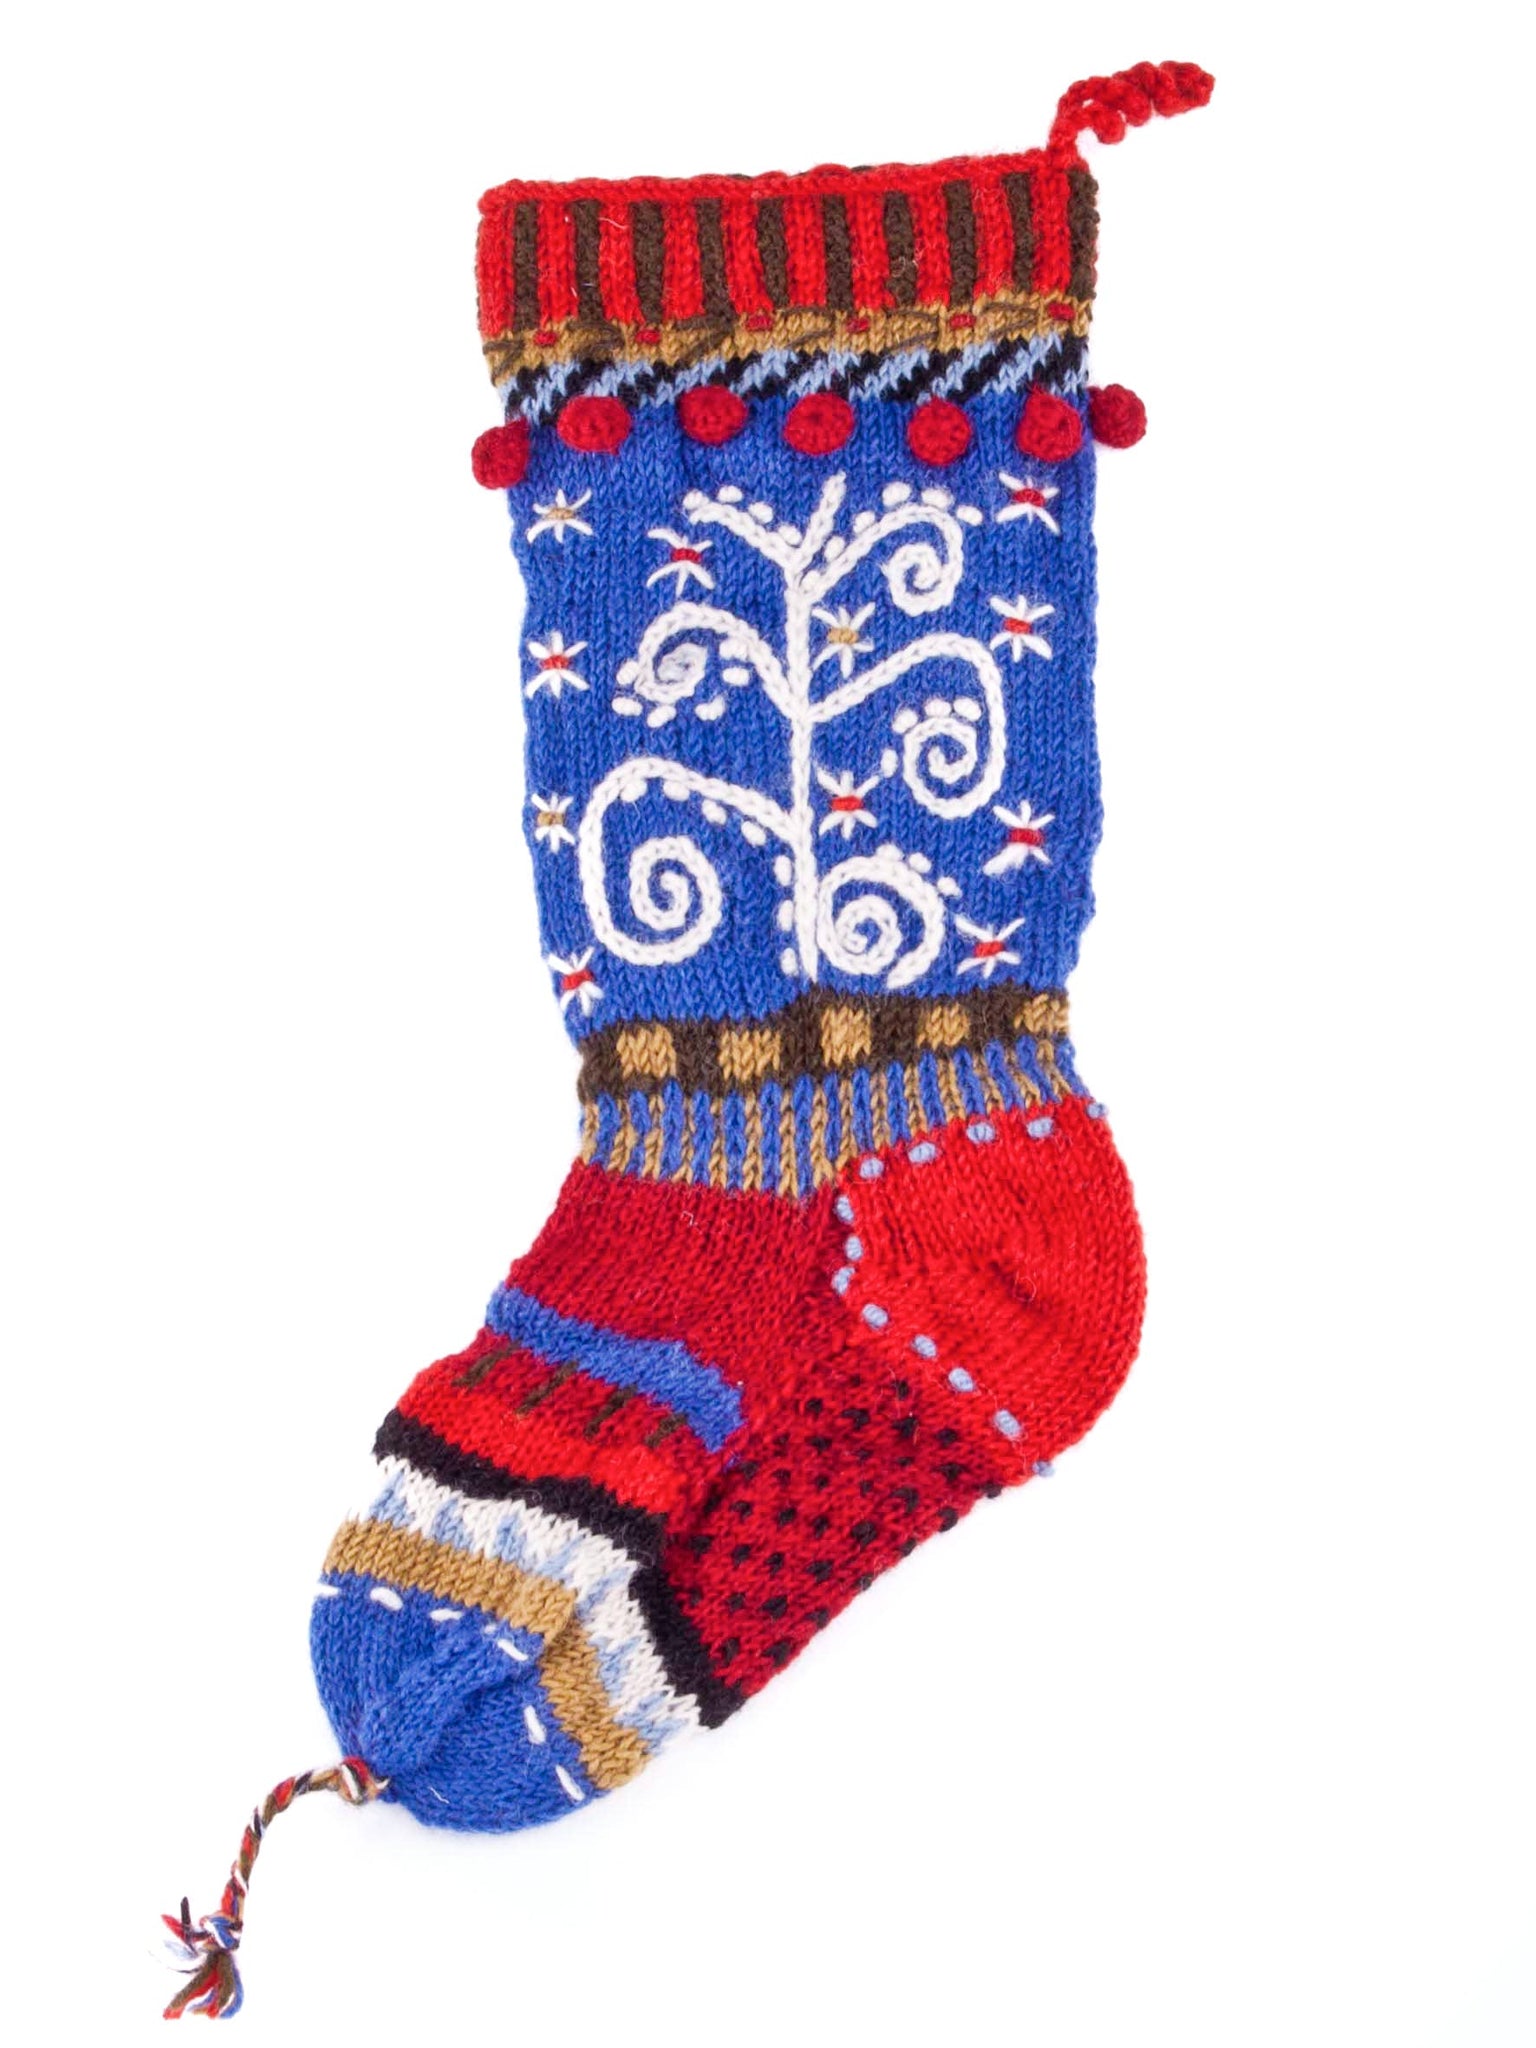 Knitted Wool Christmas Stocking - Icicle